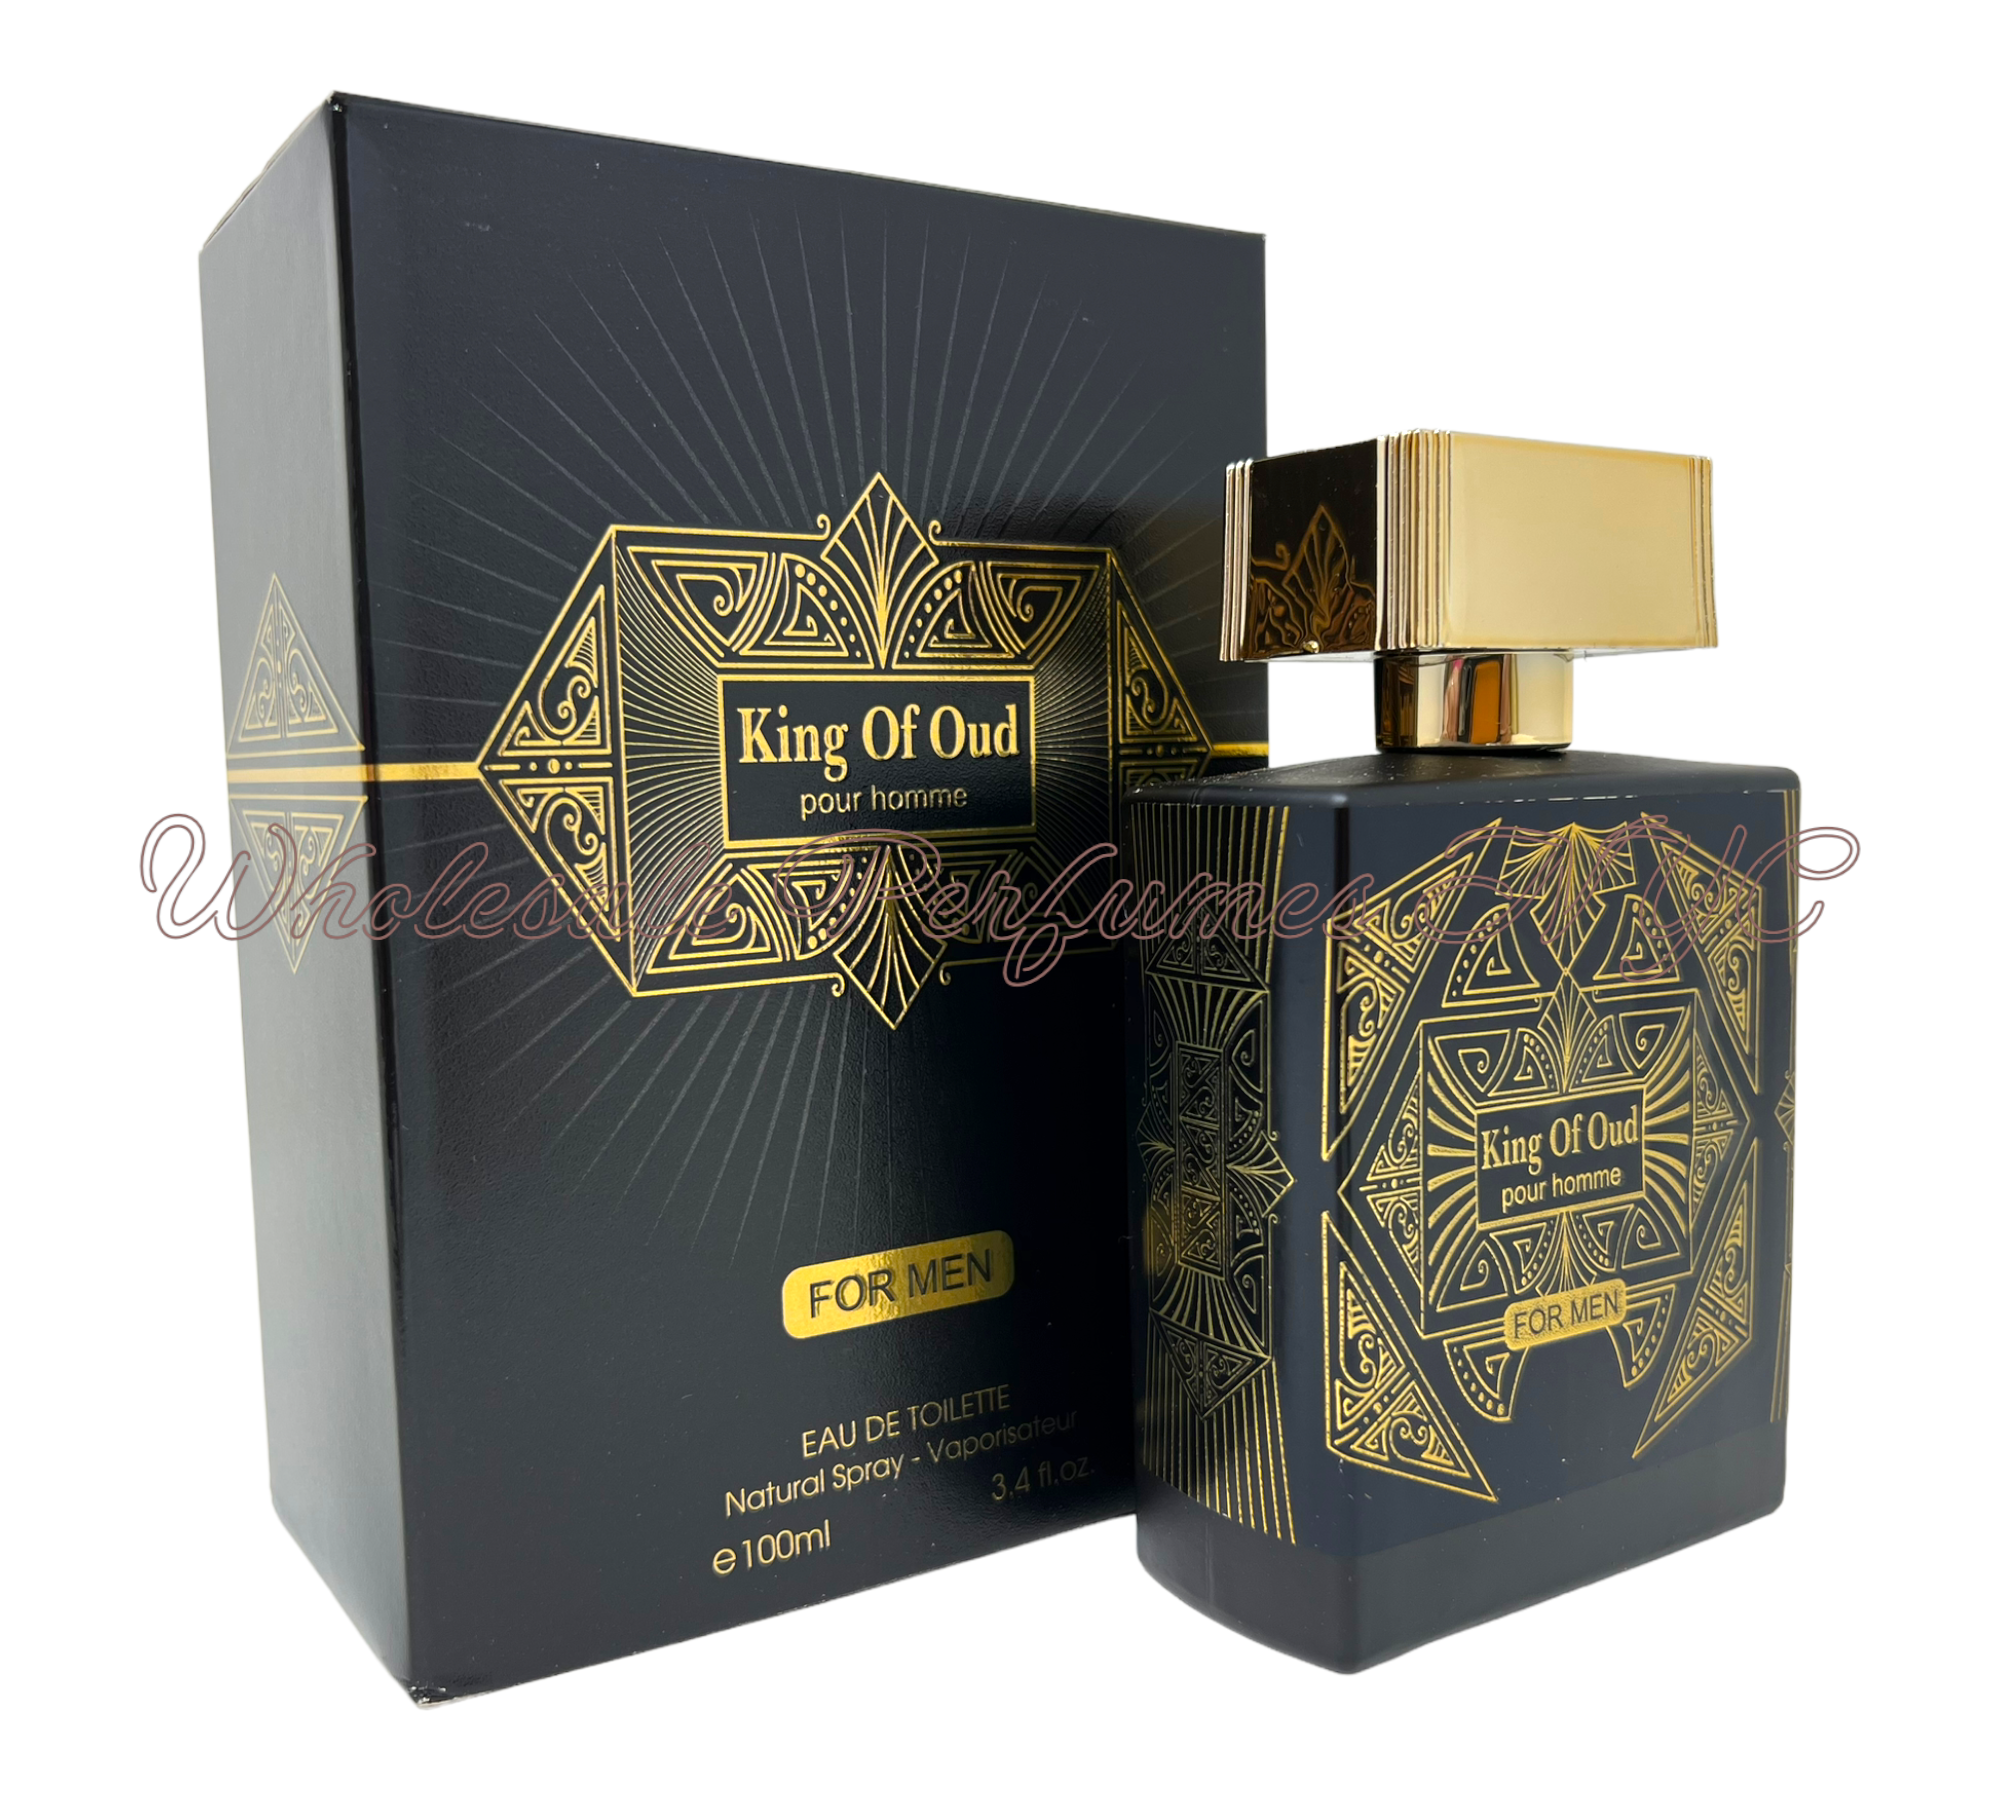 What are oud perfumes